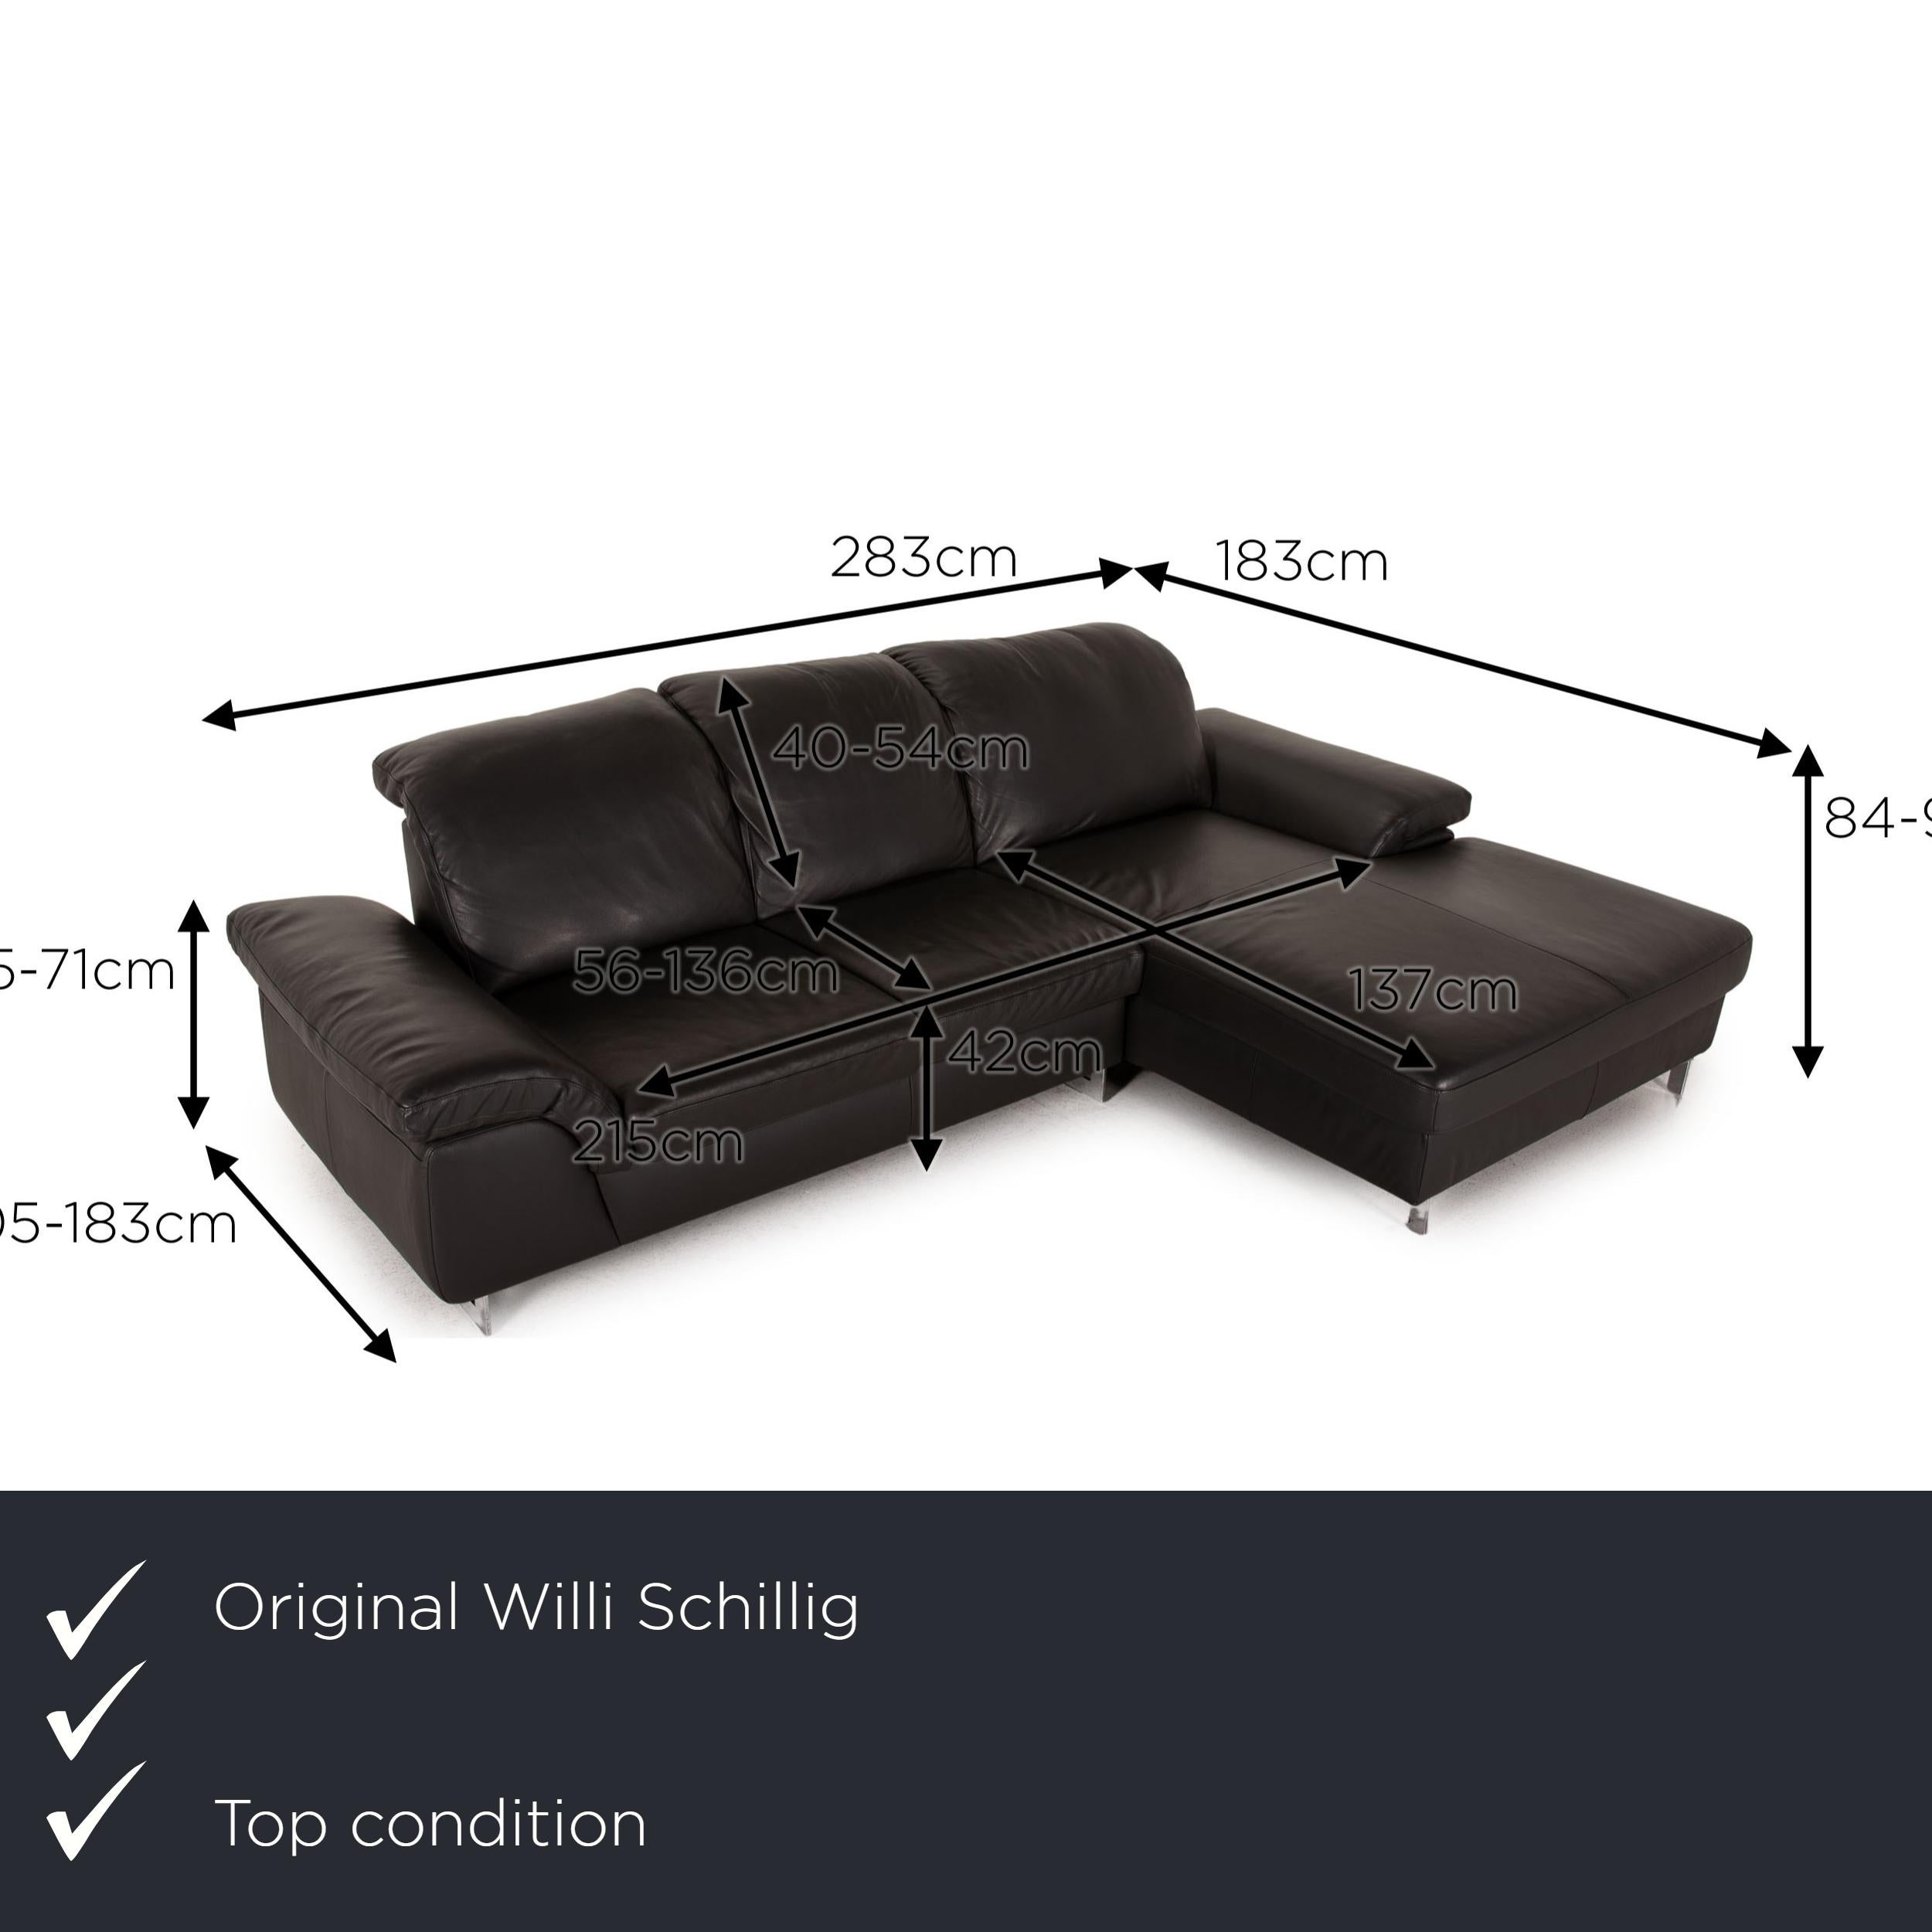 We present to you a Willi Schillig Joyzze plus leather sofa gray corner sofa function couch.
 

 Product measurements in centimeters:
 

Depth: 105
Width: 283
Height: 84
Seat height: 42
Rest height: 55
Seat depth: 56
Seat width: